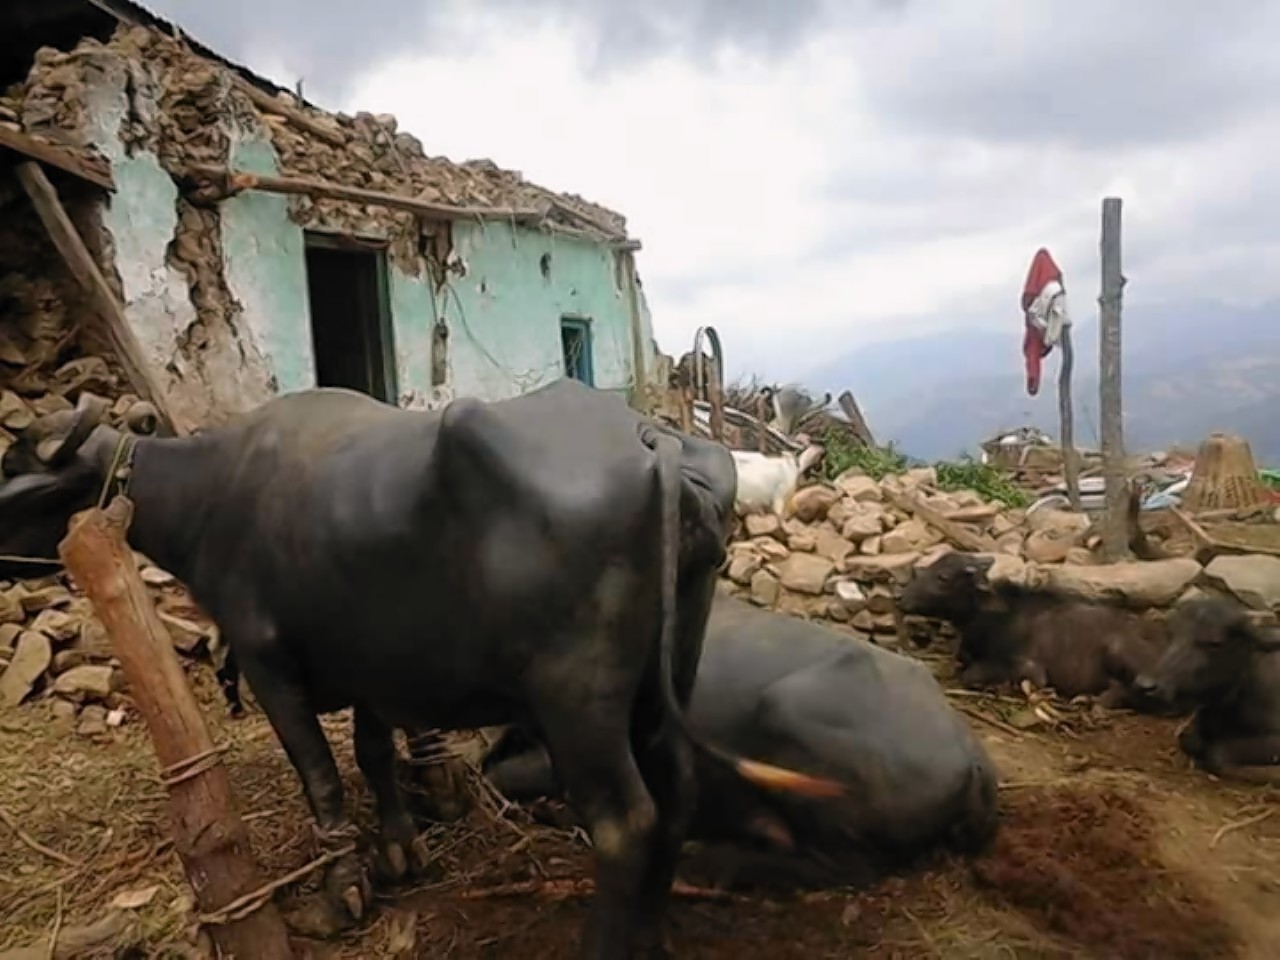 Nepalese farmers are struggling following last month's earthquake